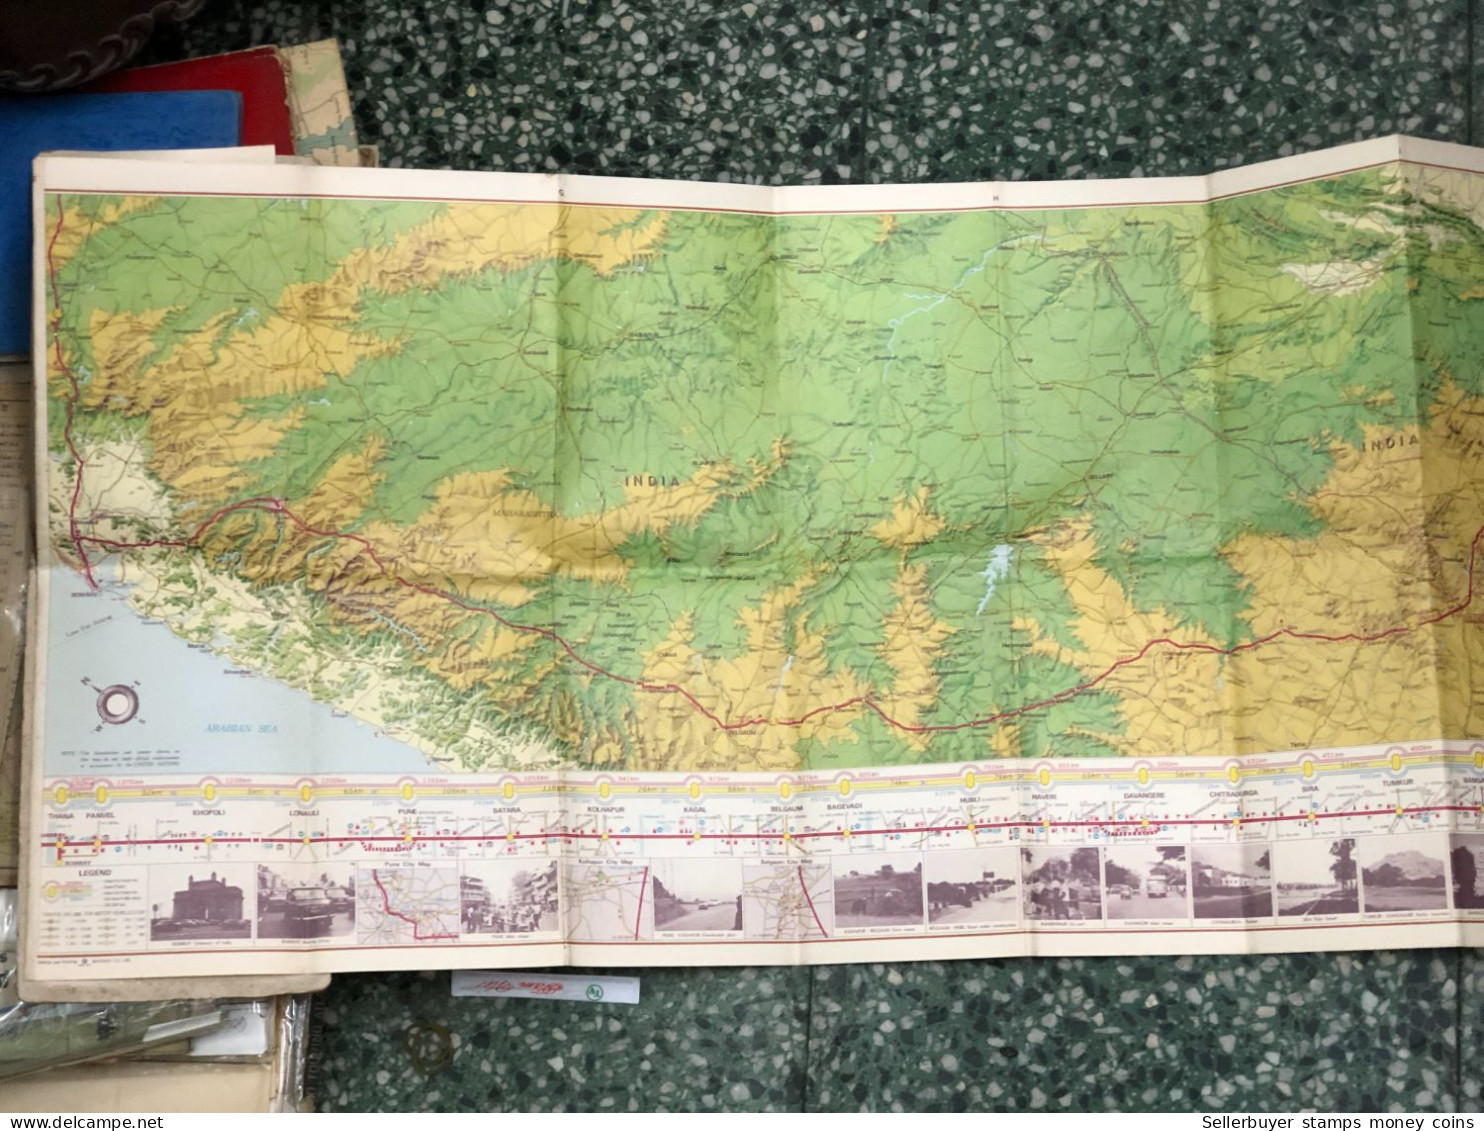 world maps old-ASIAN HIGHWAY ROUTE MAP INDIA SRI LANKA before 1975-1 pcs